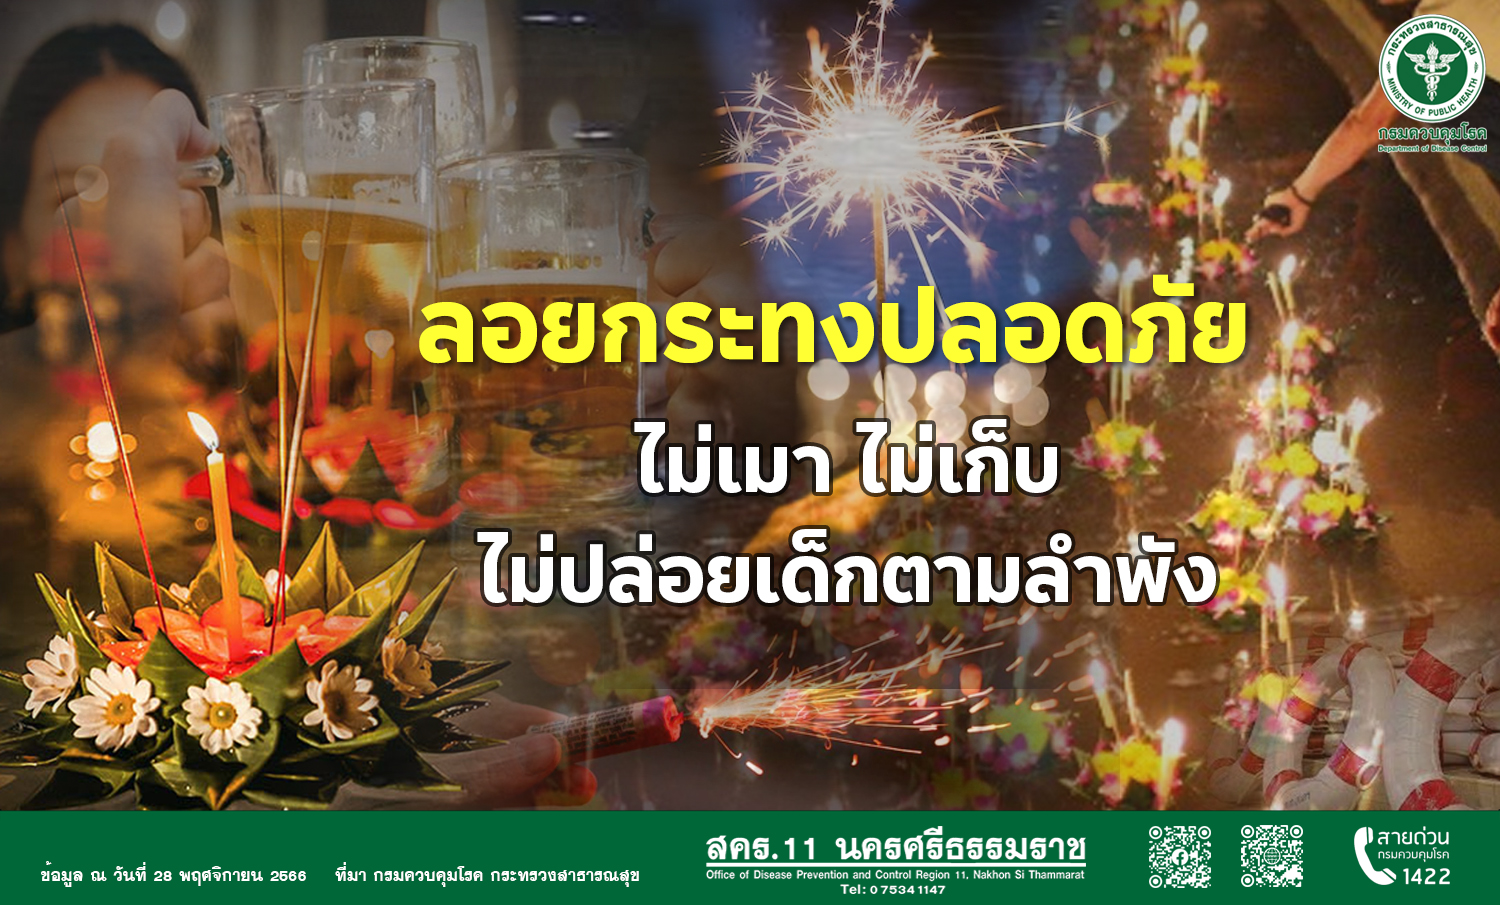 Loi Krathong is safe: “Don’t get drunk, don’t collect things, don’t leave children alone.”